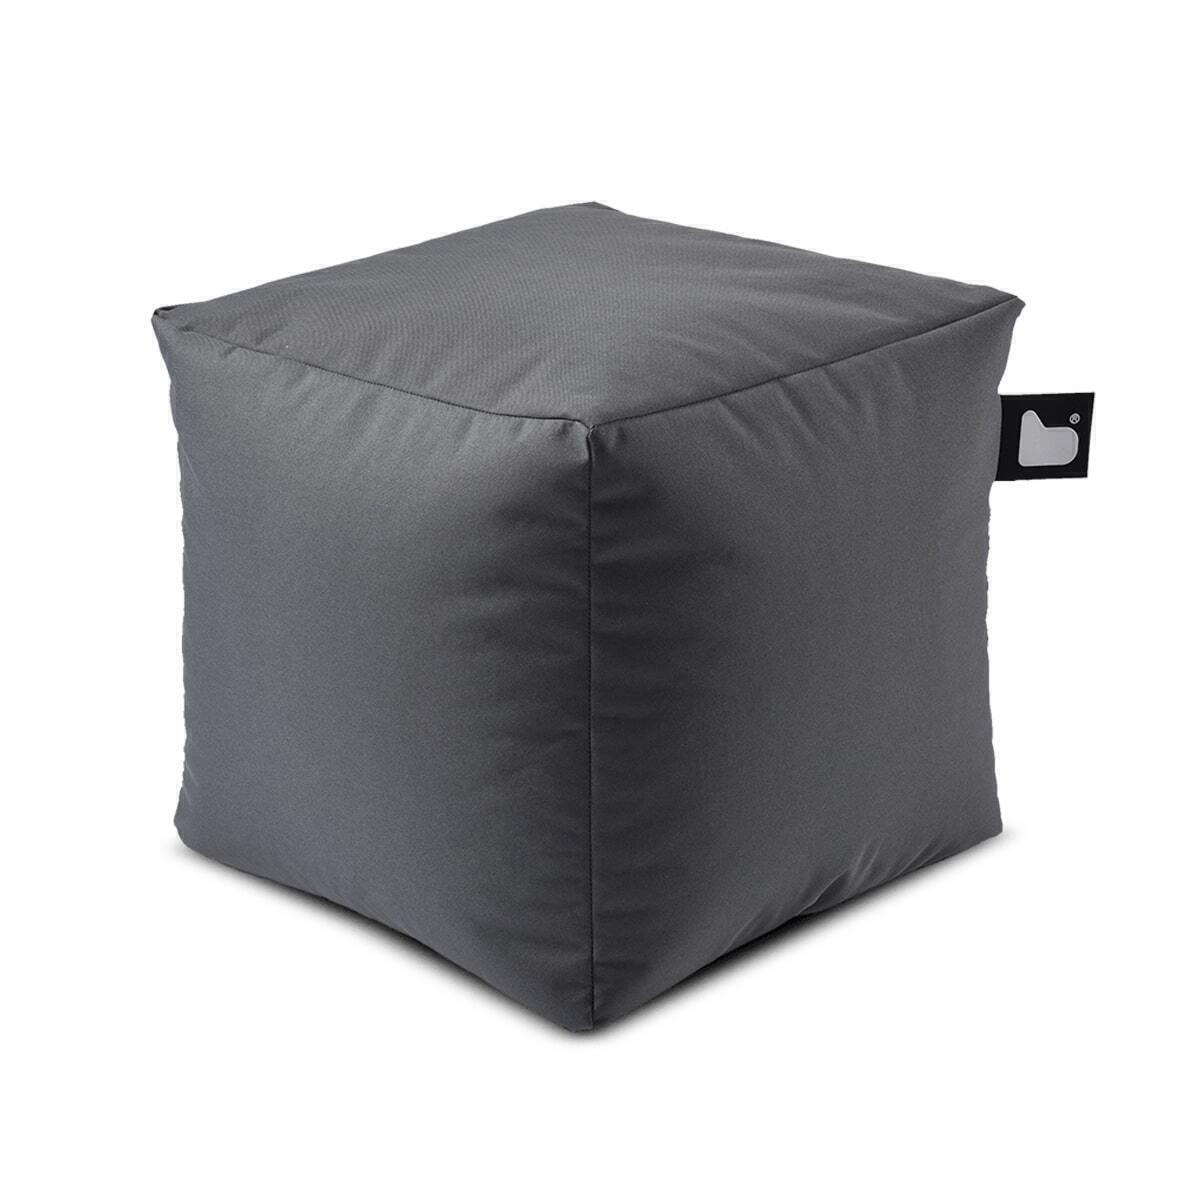 Extreme Lounging - Outdoor Bean Box  - Grey product image